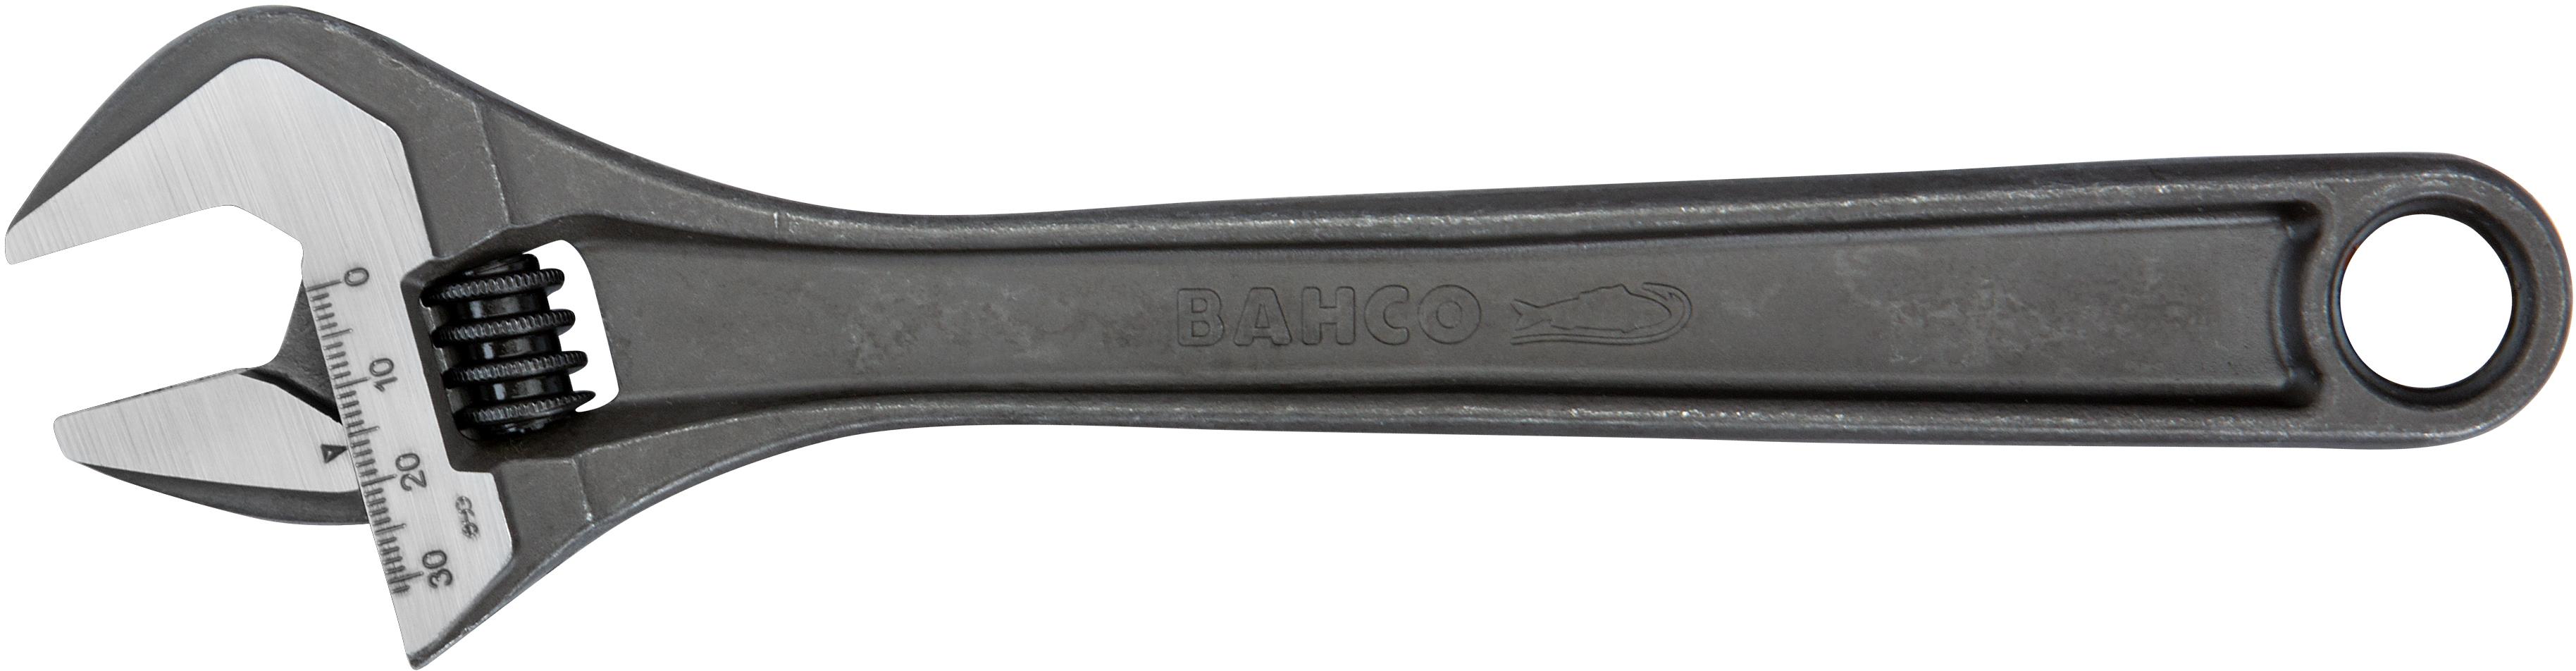 Bahco Adjustable Wrench 10 Inch 8072 30Mm